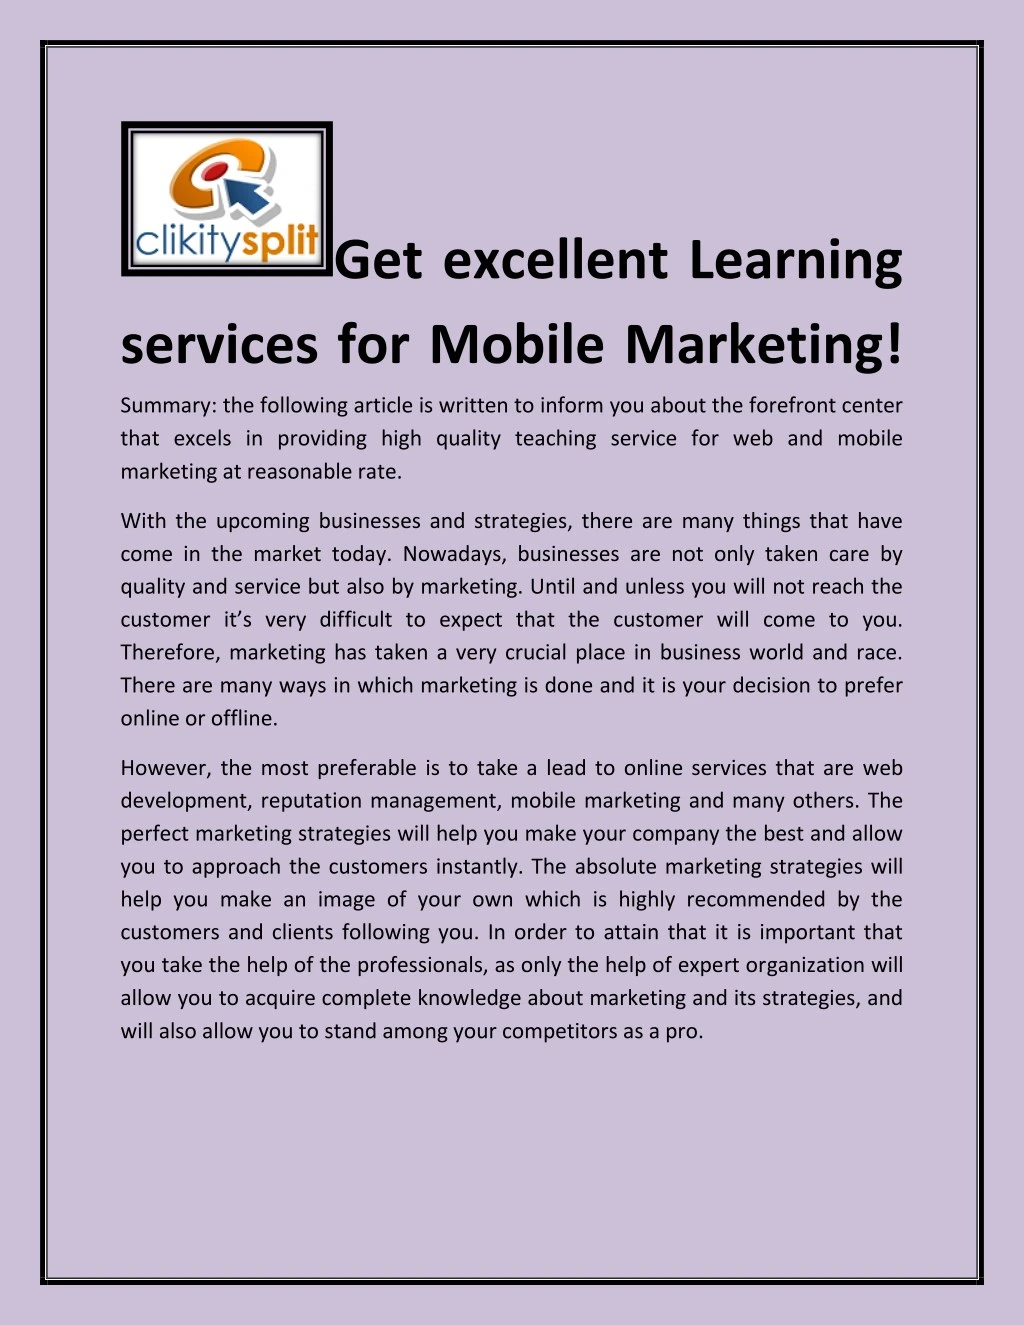 get excellent learning services for mobile